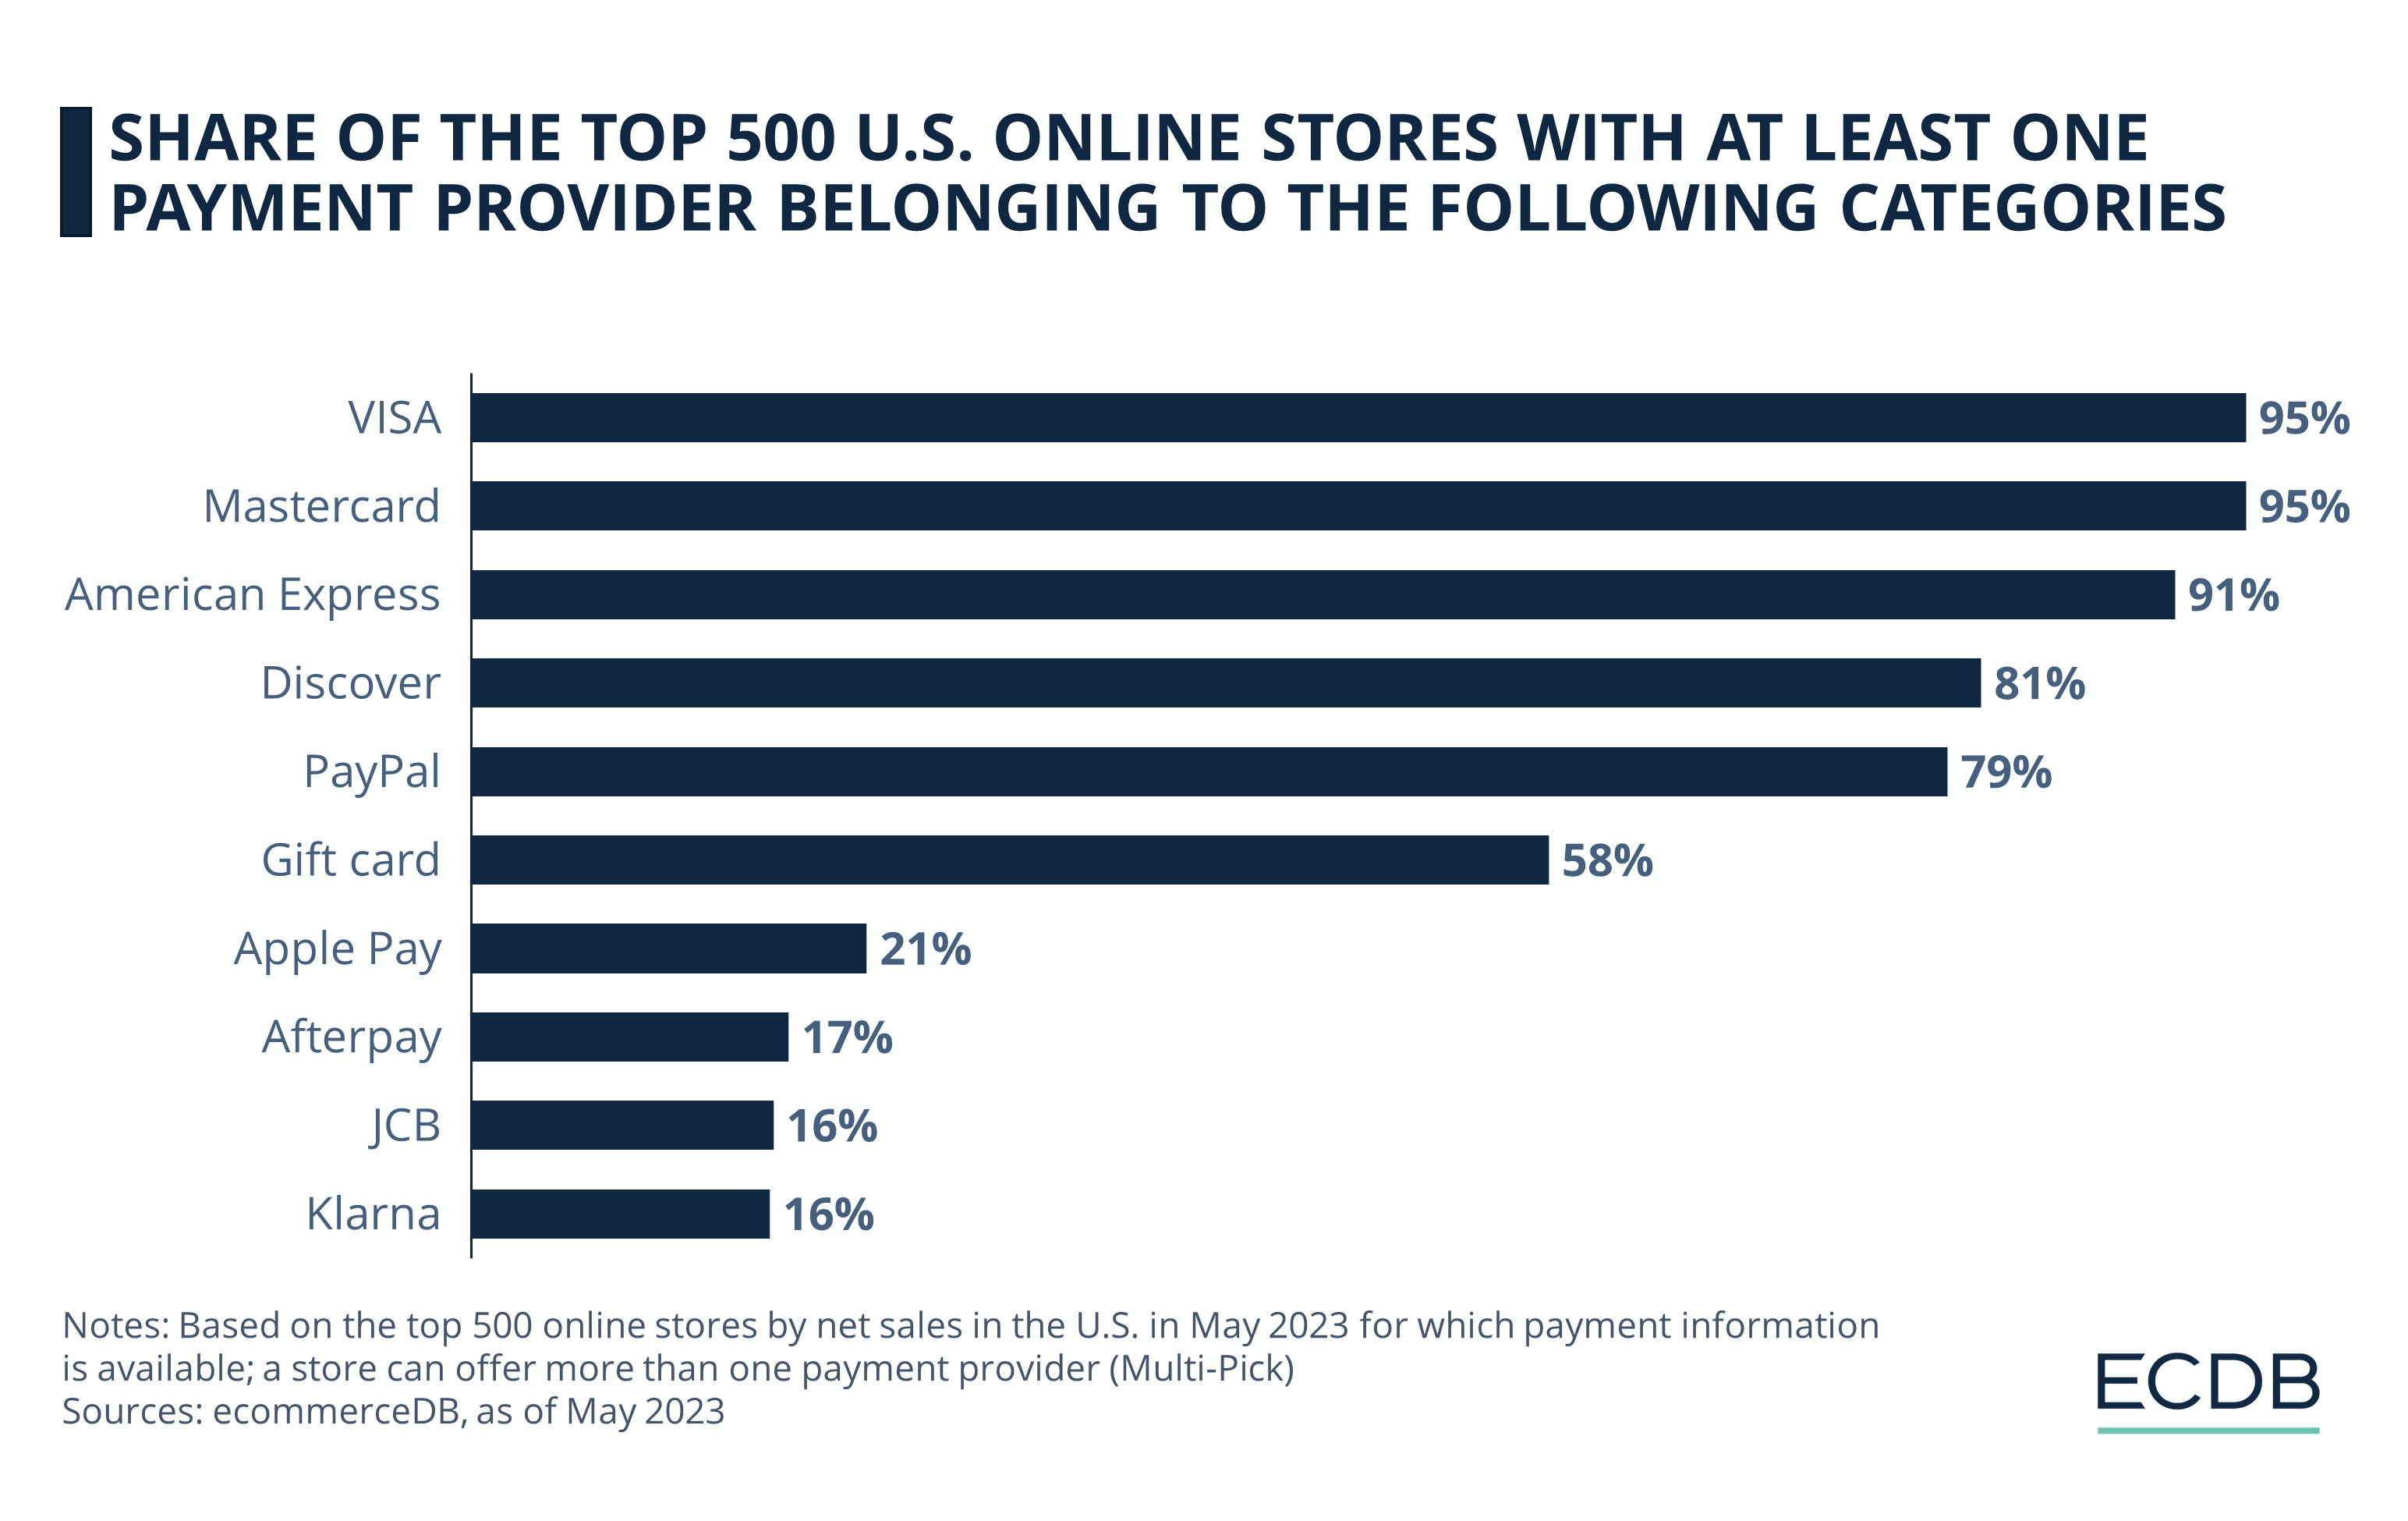 Share of the Top 500 US Online Stores with at Least One Payment Provider Belonging to the Following Categories